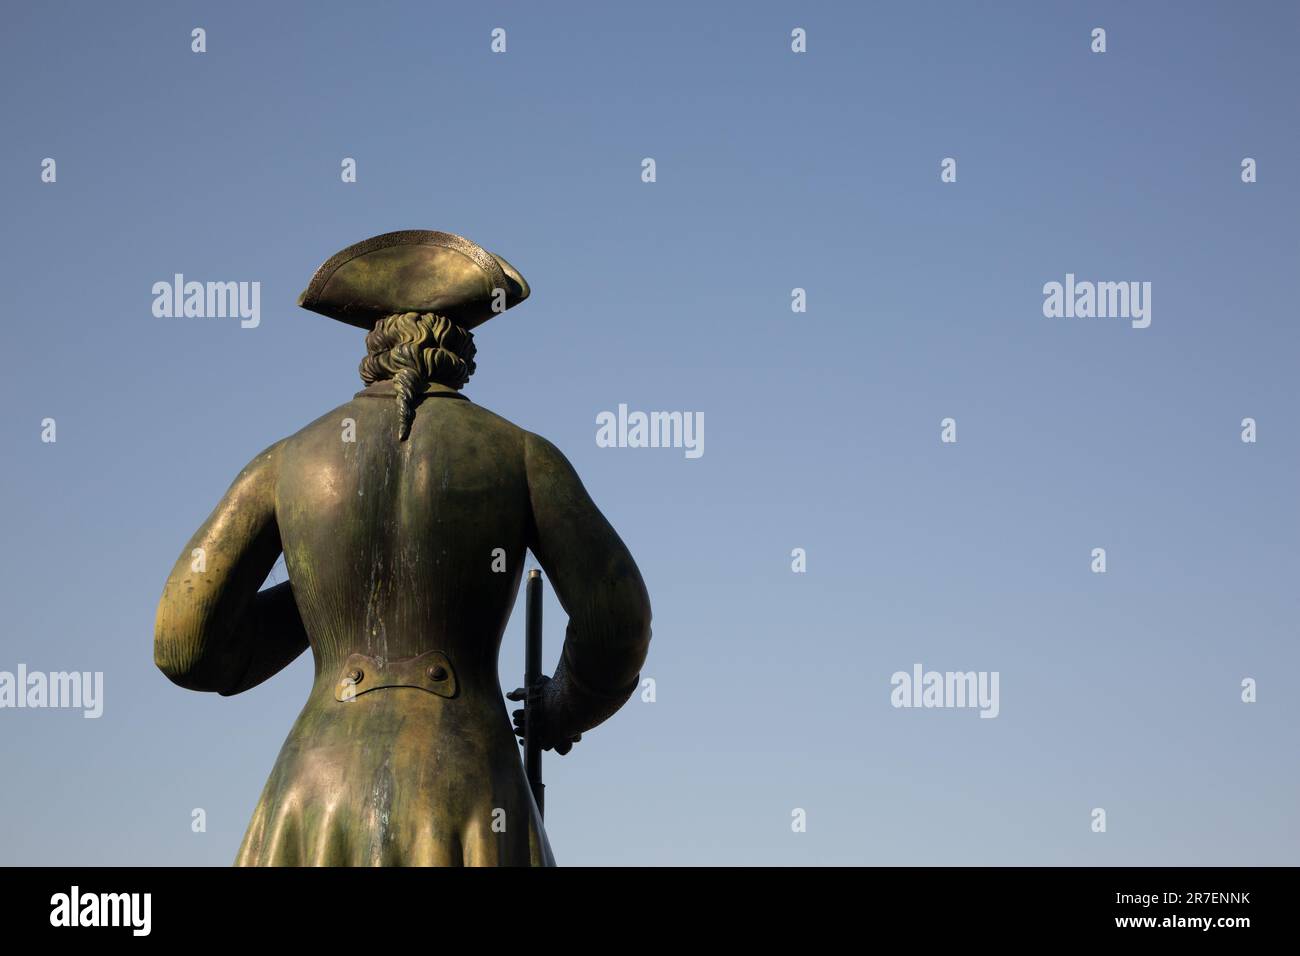 The statue of Peter the Great, dressed in 17th century naval garb, Greenwich, London. Shown from the rear against a blue sky. Landscape orientation Stock Photo